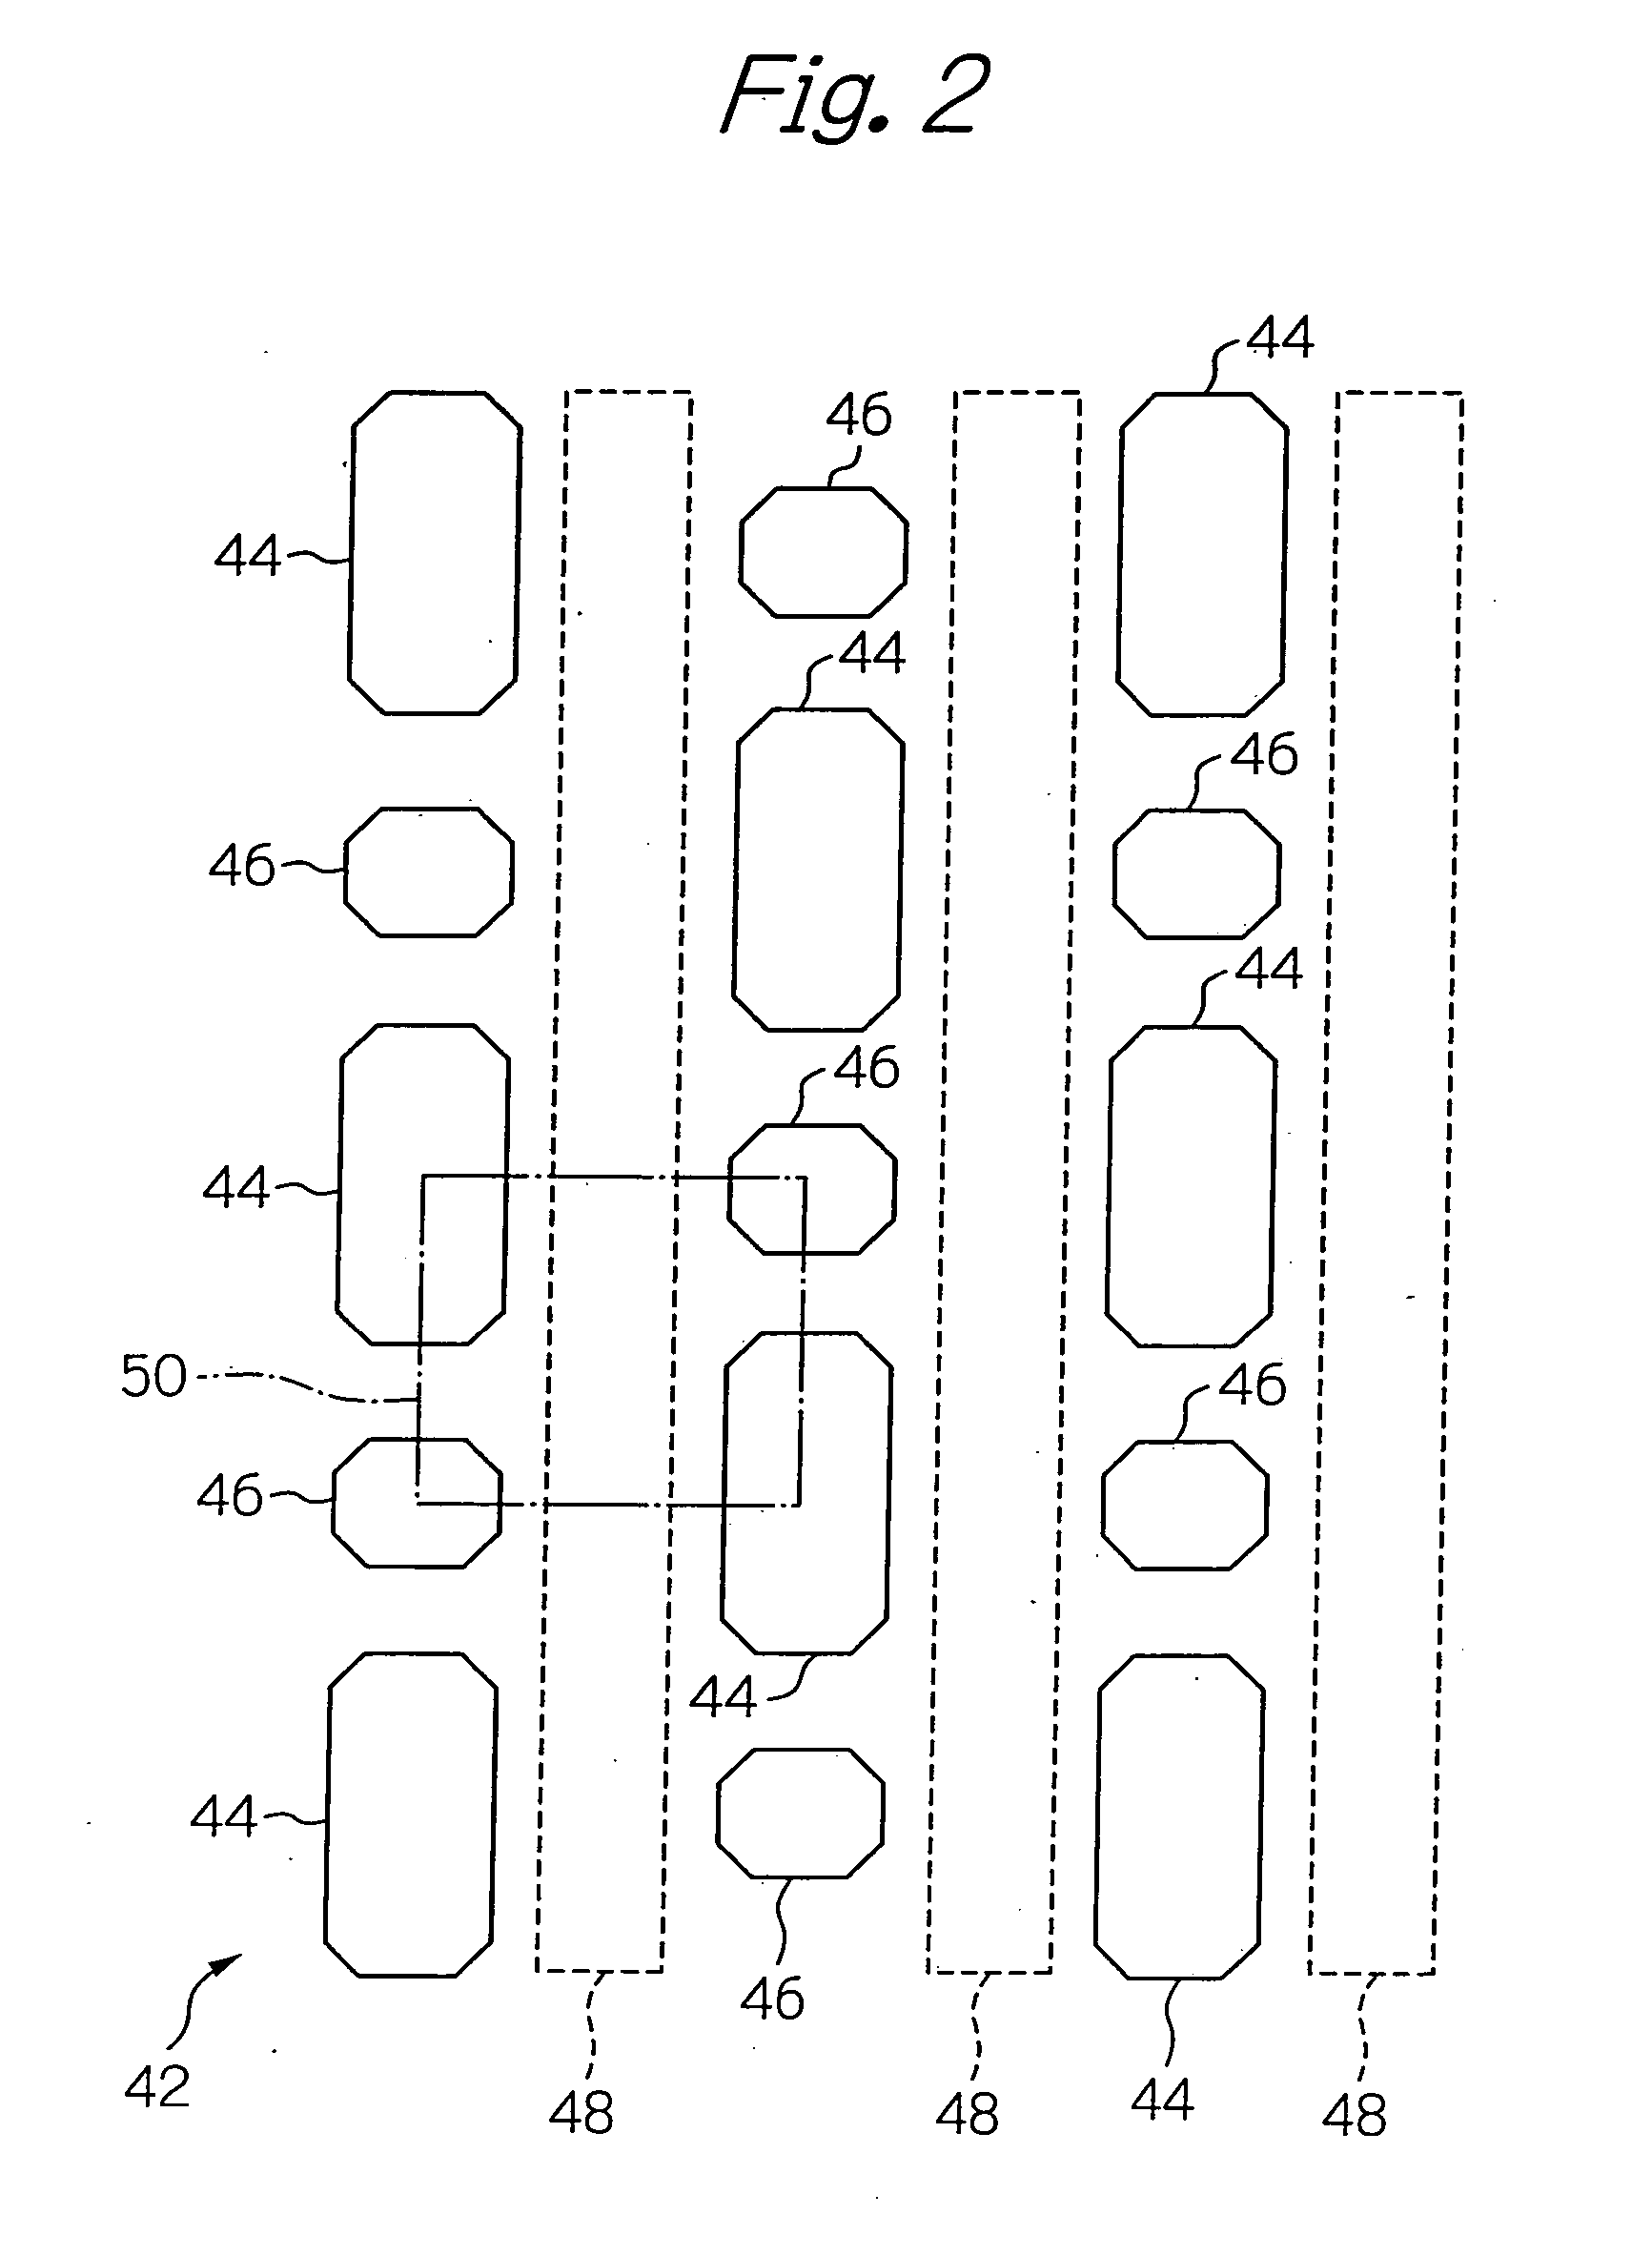 Solid-state image sensor obviating degradation of image quality and apparatus using the same